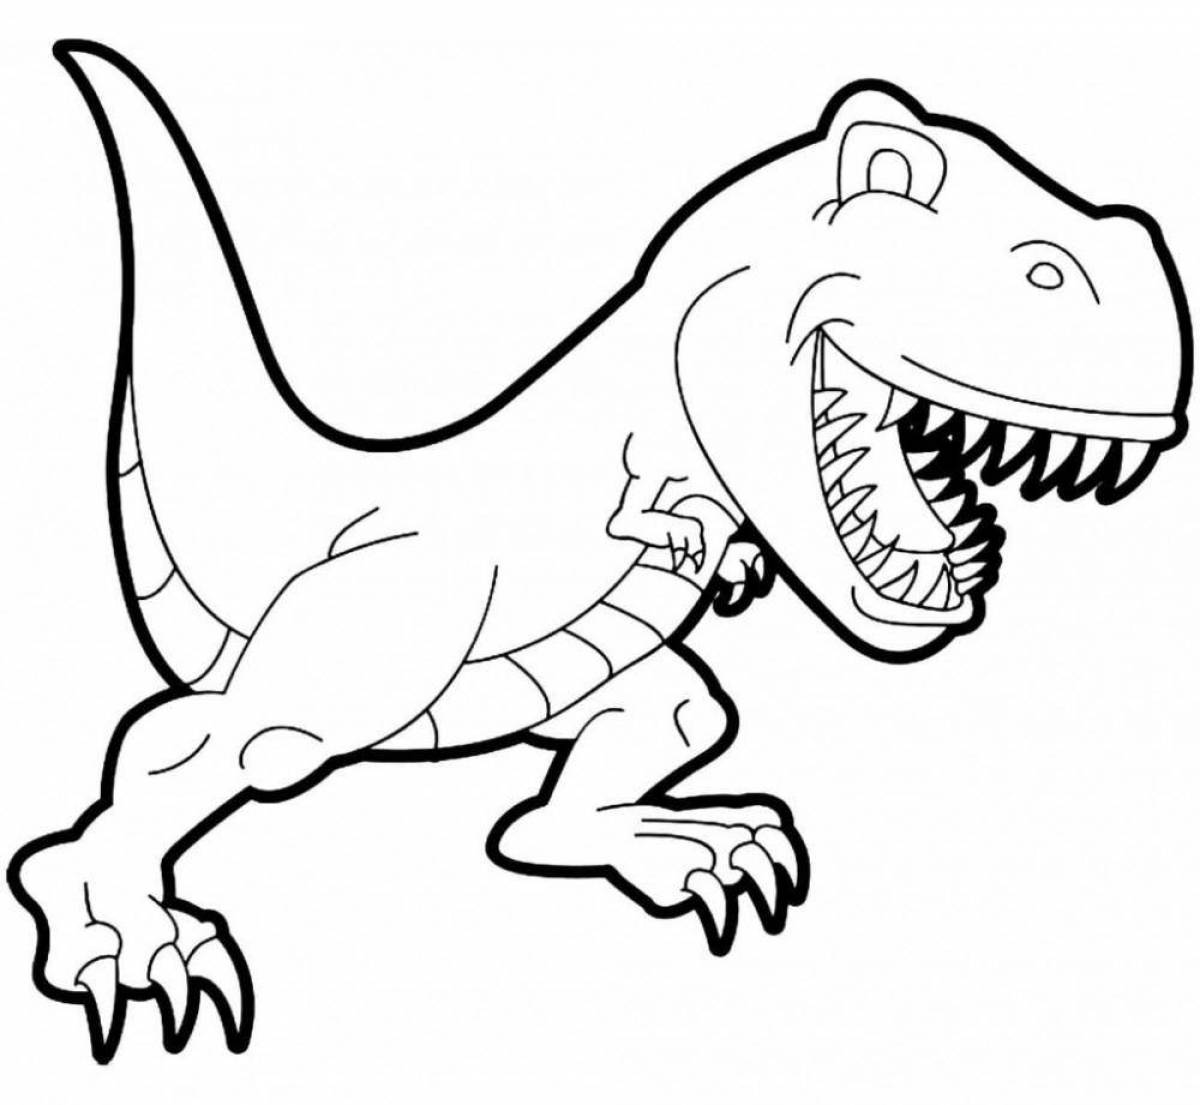 Charming dino coloring page